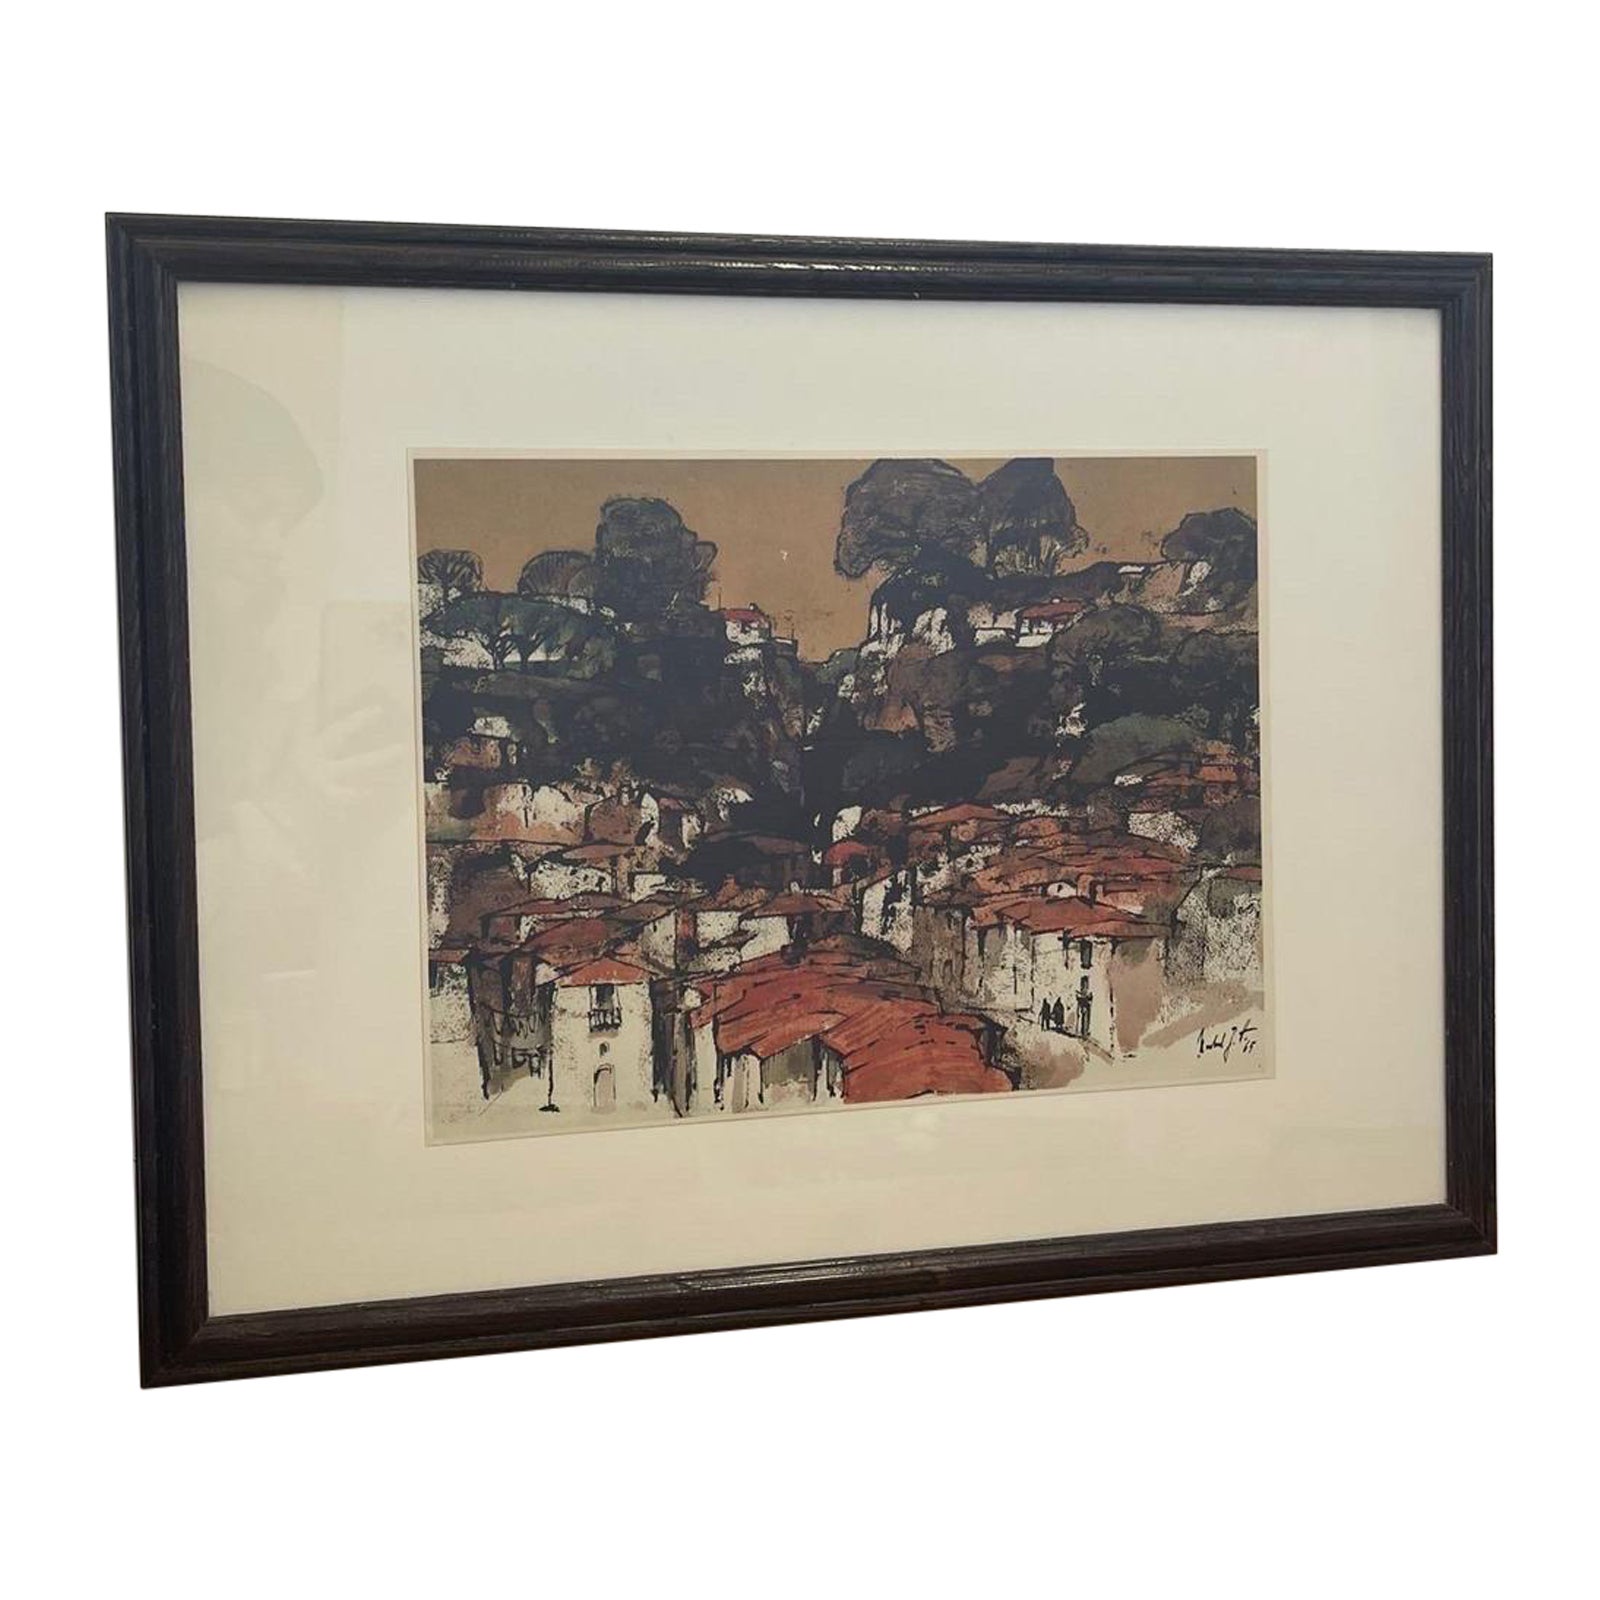 Vintage Framed and Signed Art Print “Mountain Village in Portugal” by Hartmann